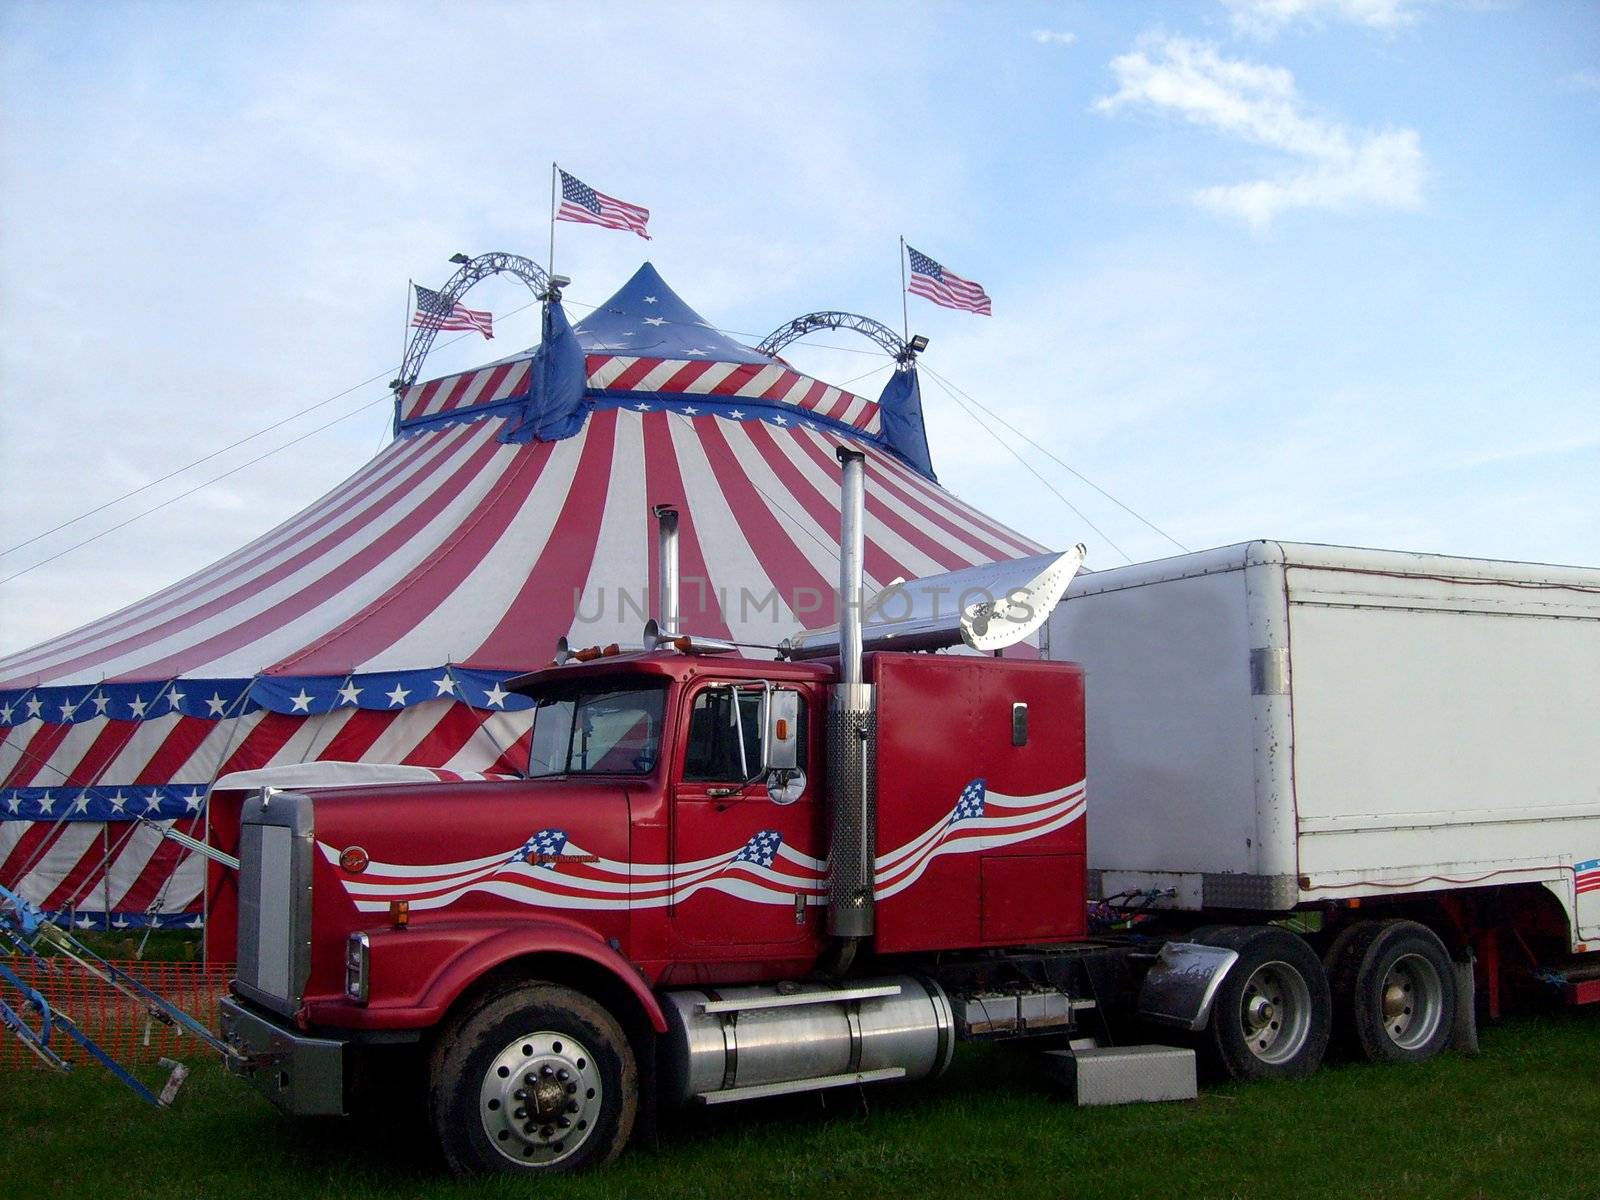 Circus big top tent in field decorated with stars and stripes, big monster truck in foreground.